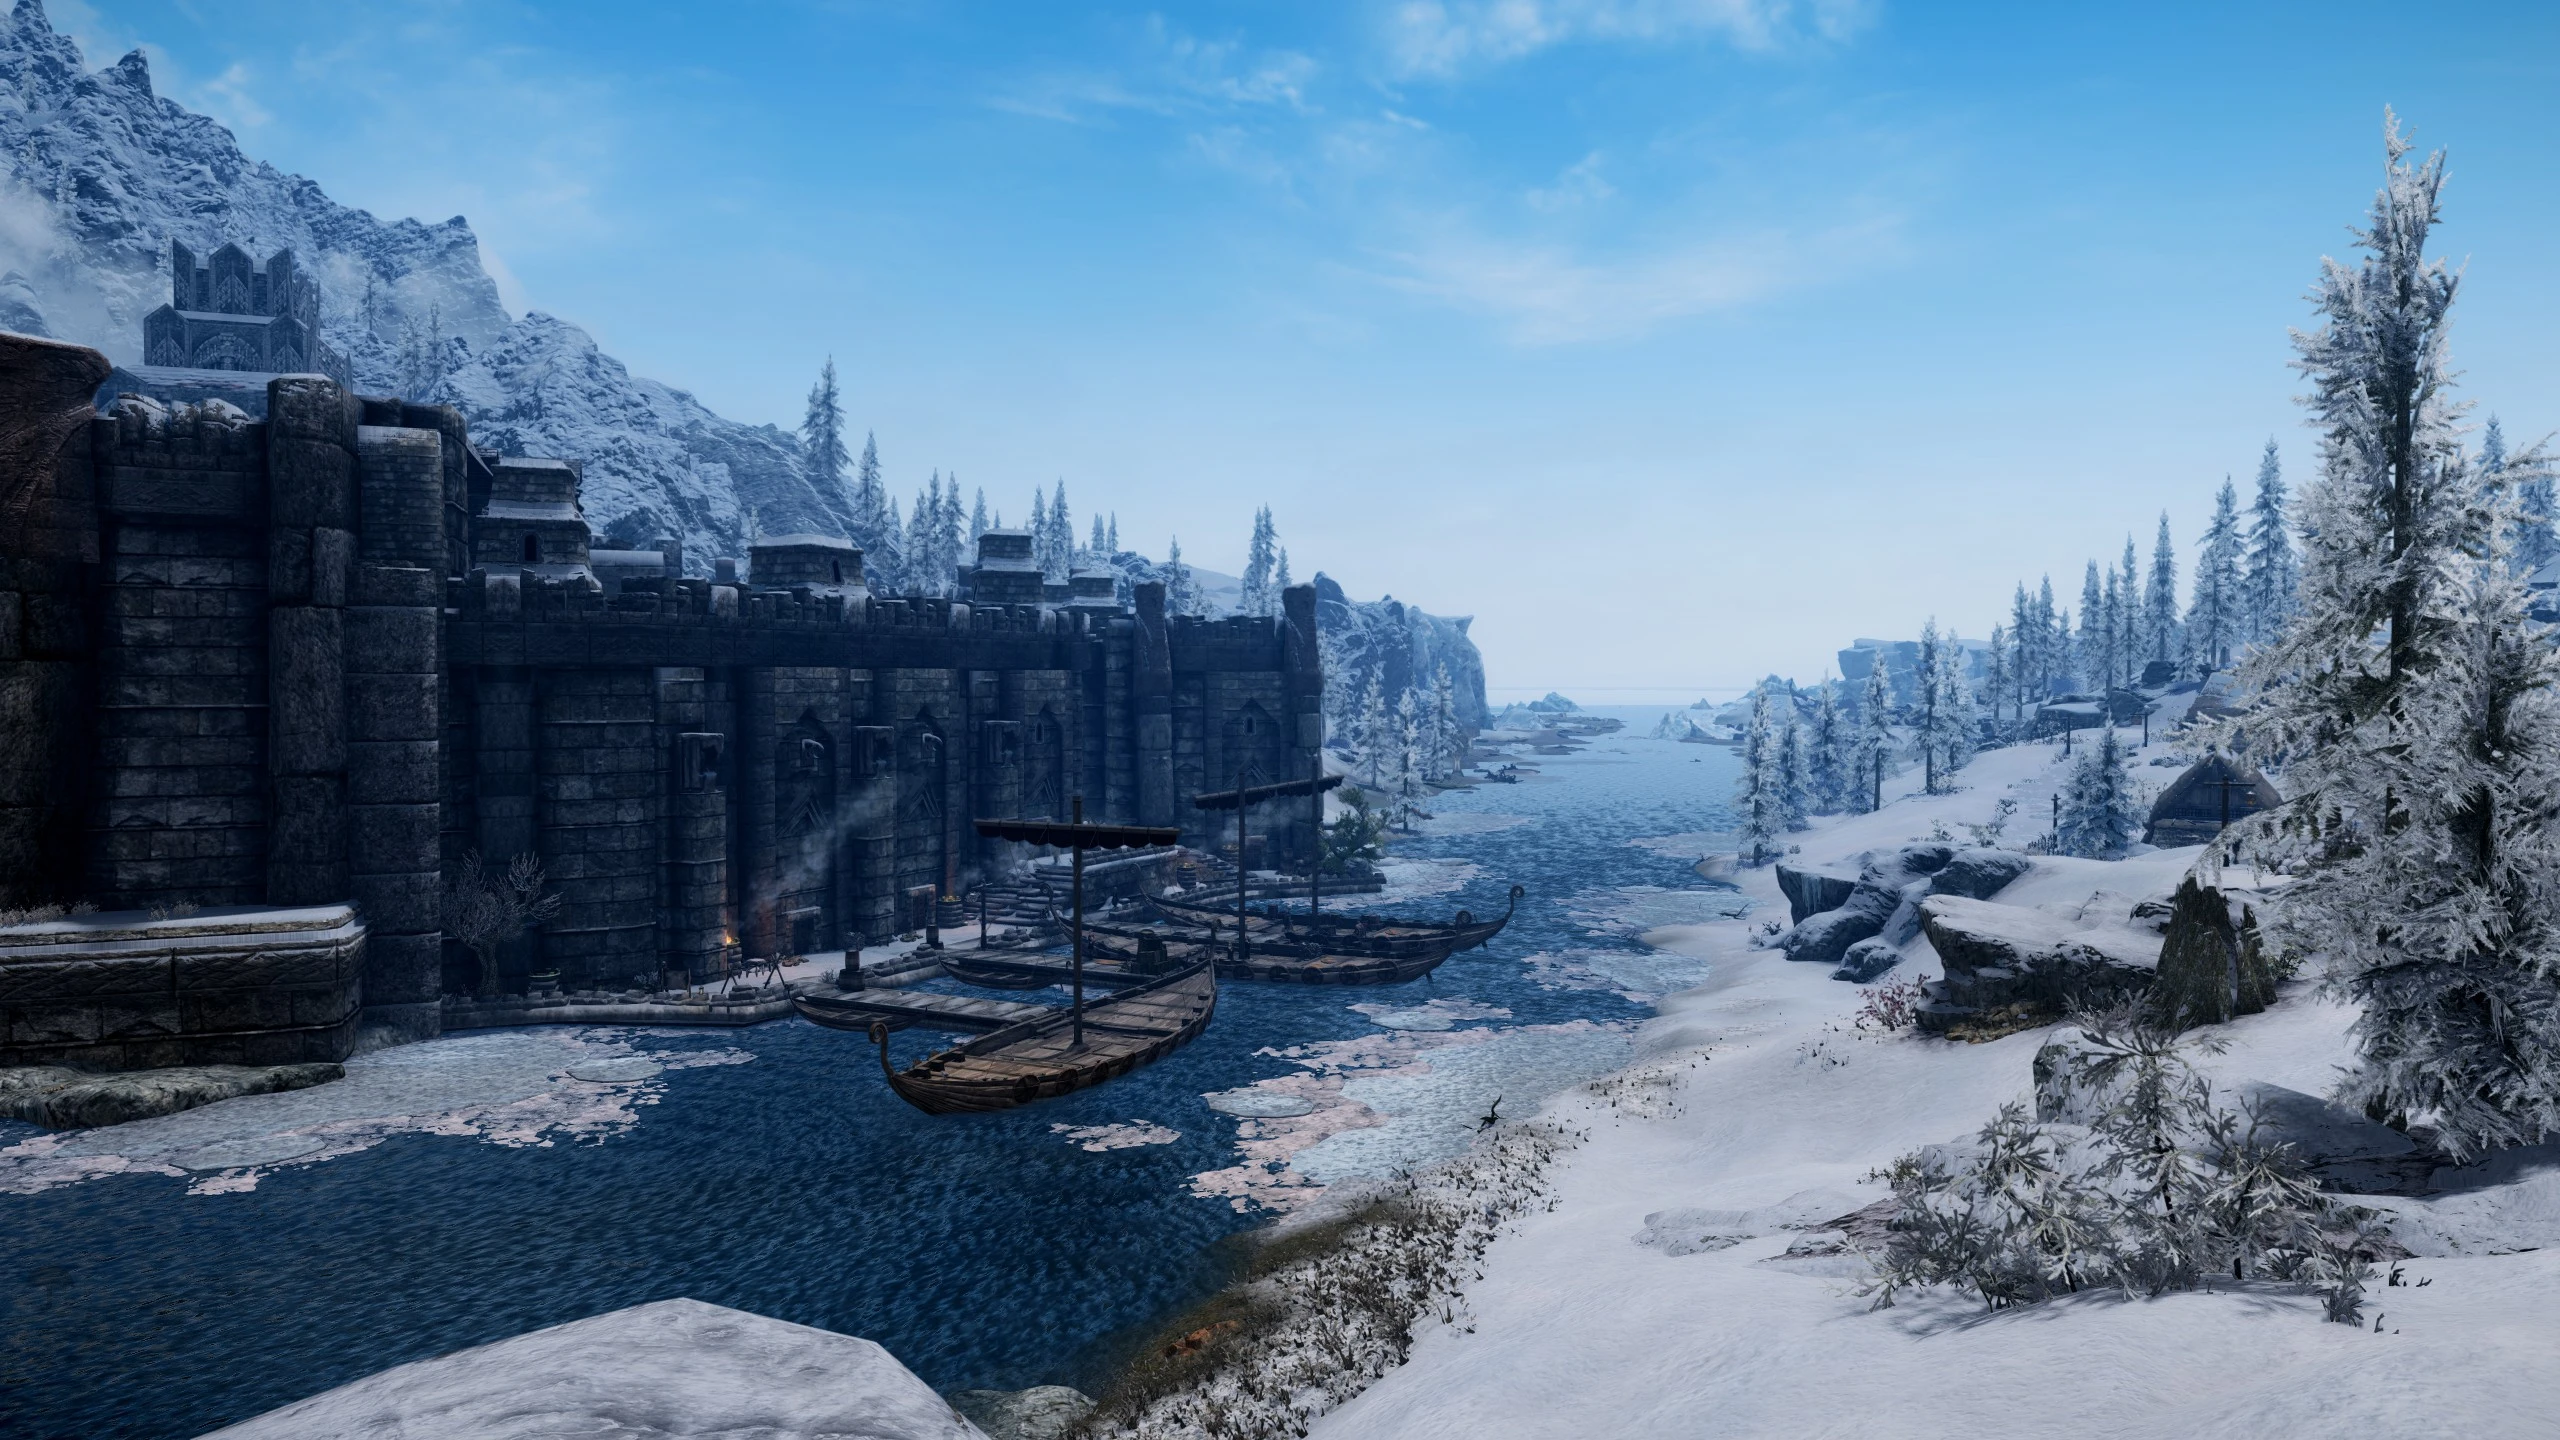 where are the woodheart docks in eso